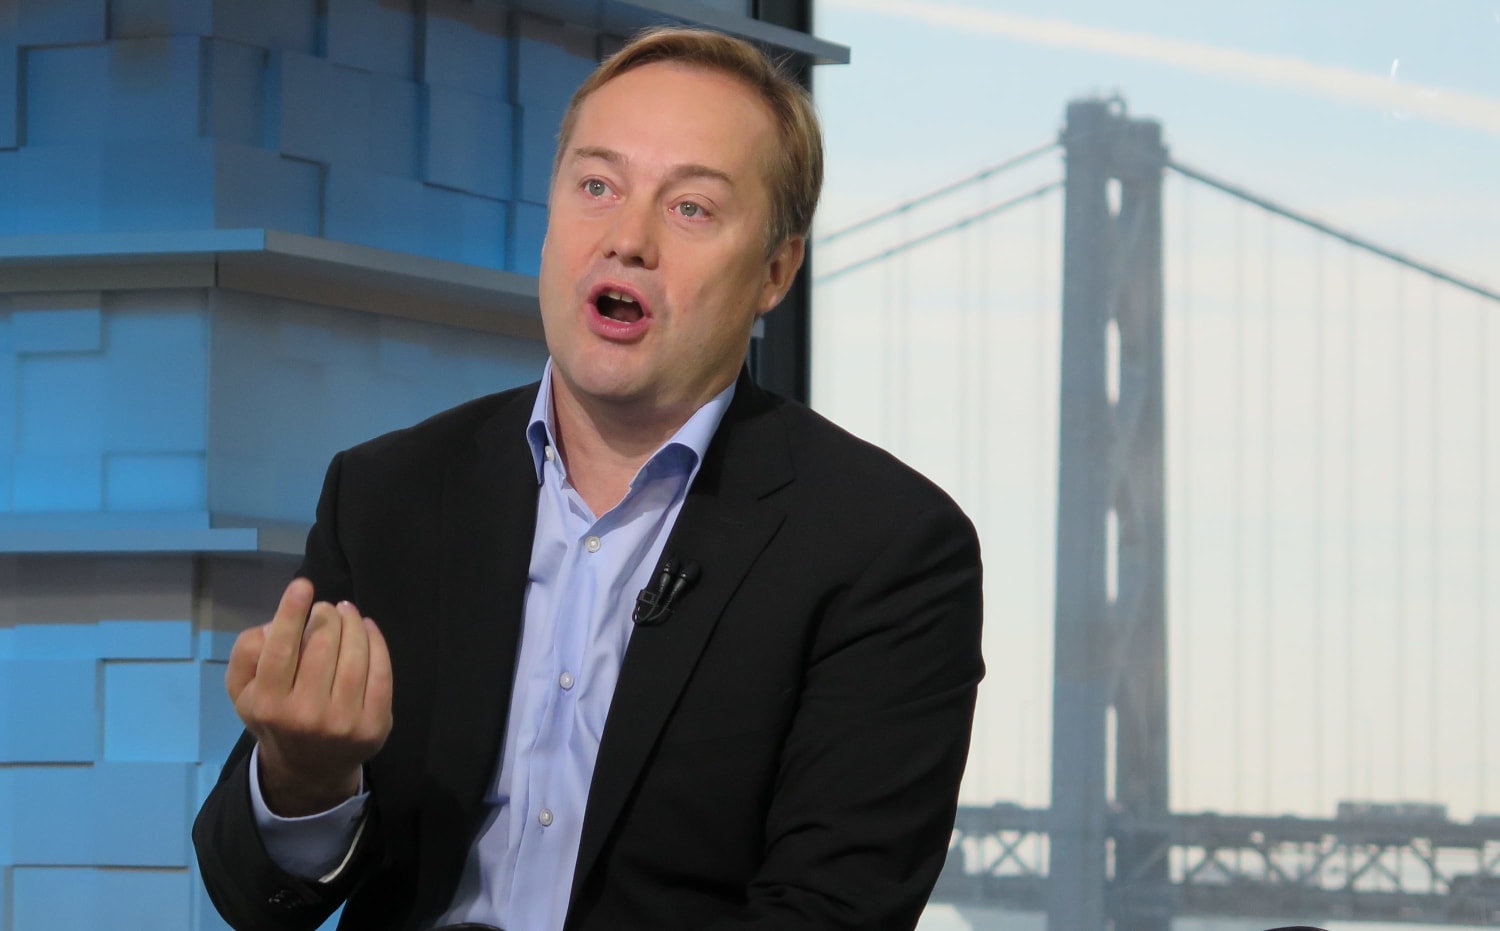 Angel investor Jason Calacanis says he hates Trump but president's small business loan program worked